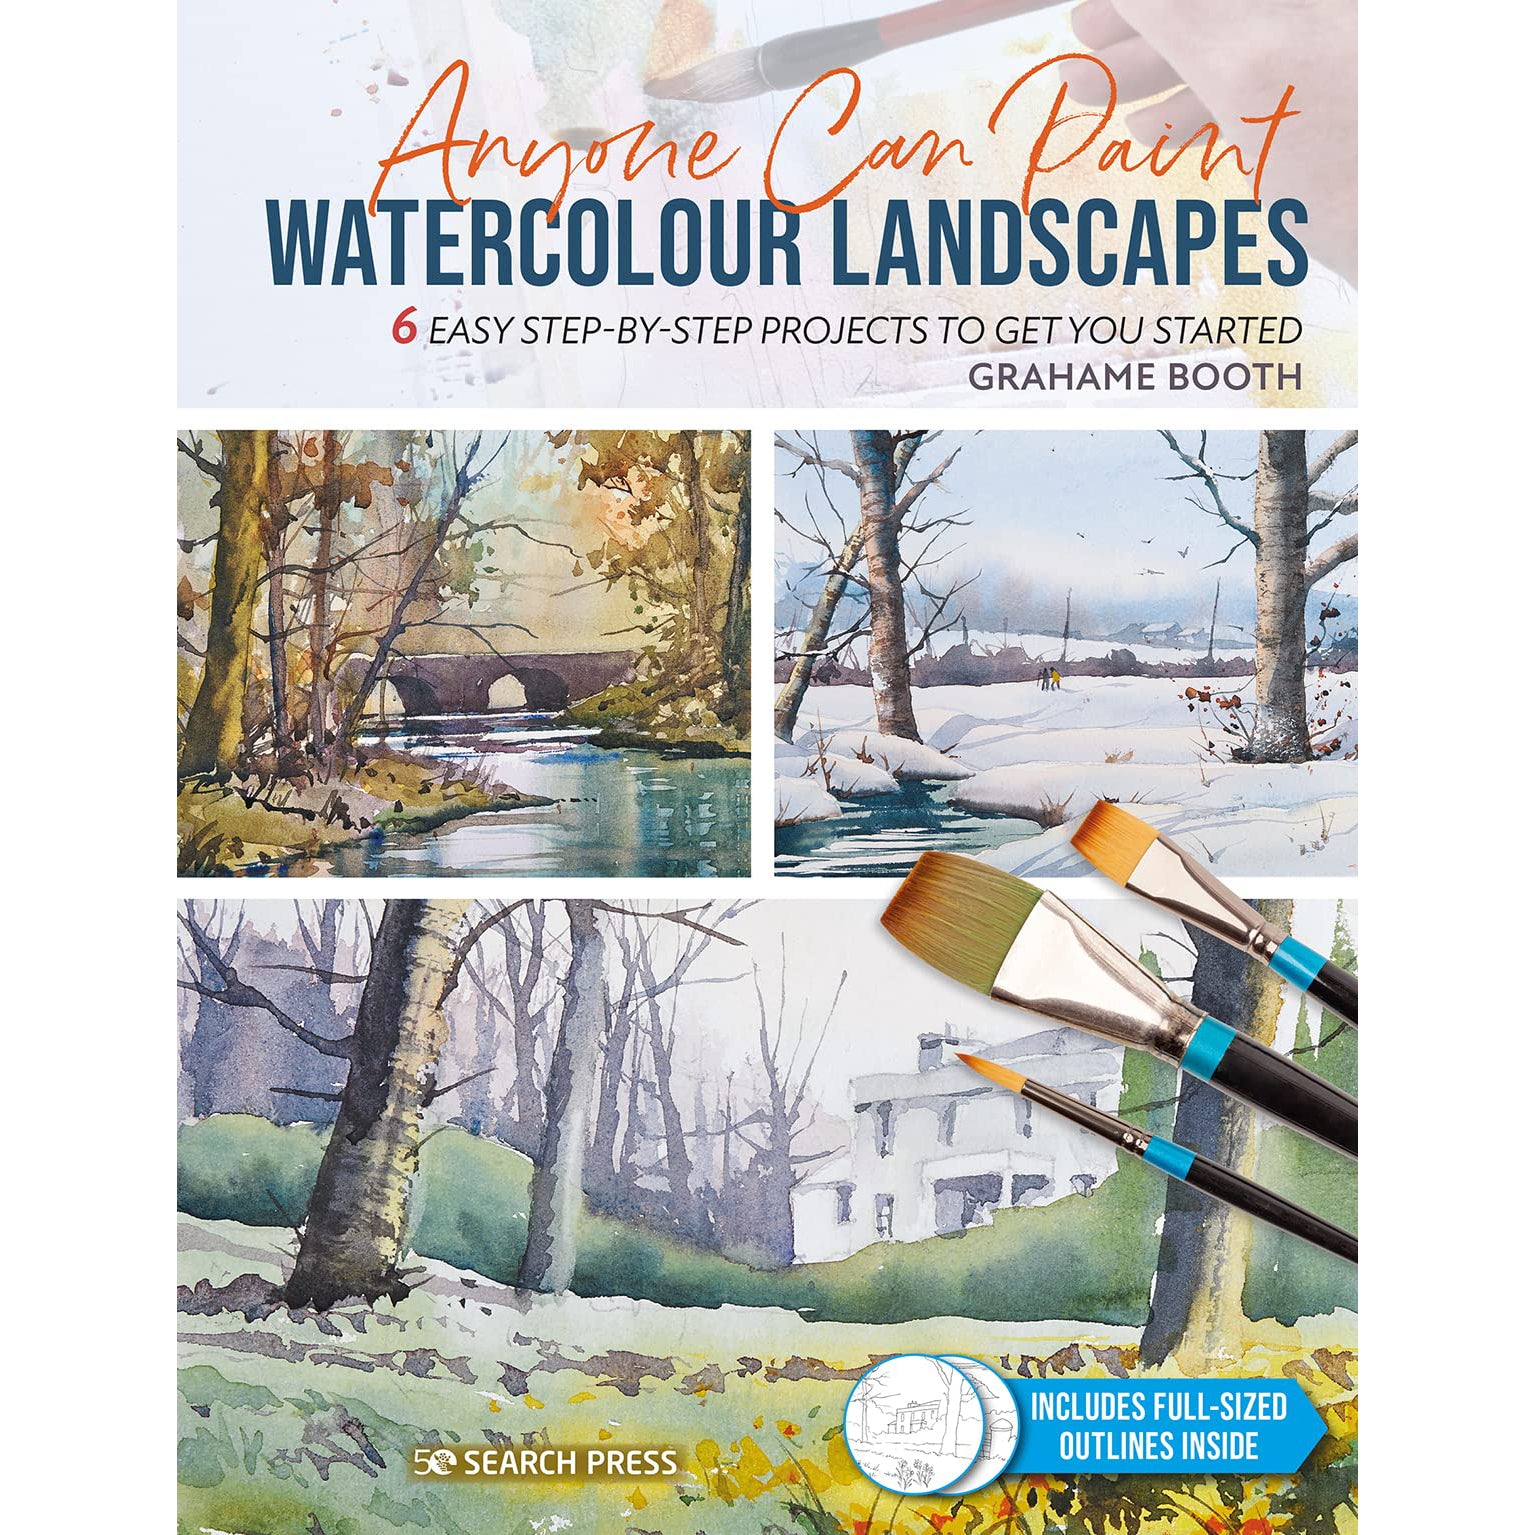 Anyone Can Paint Watercolour Landscapes - Getty Museum Store